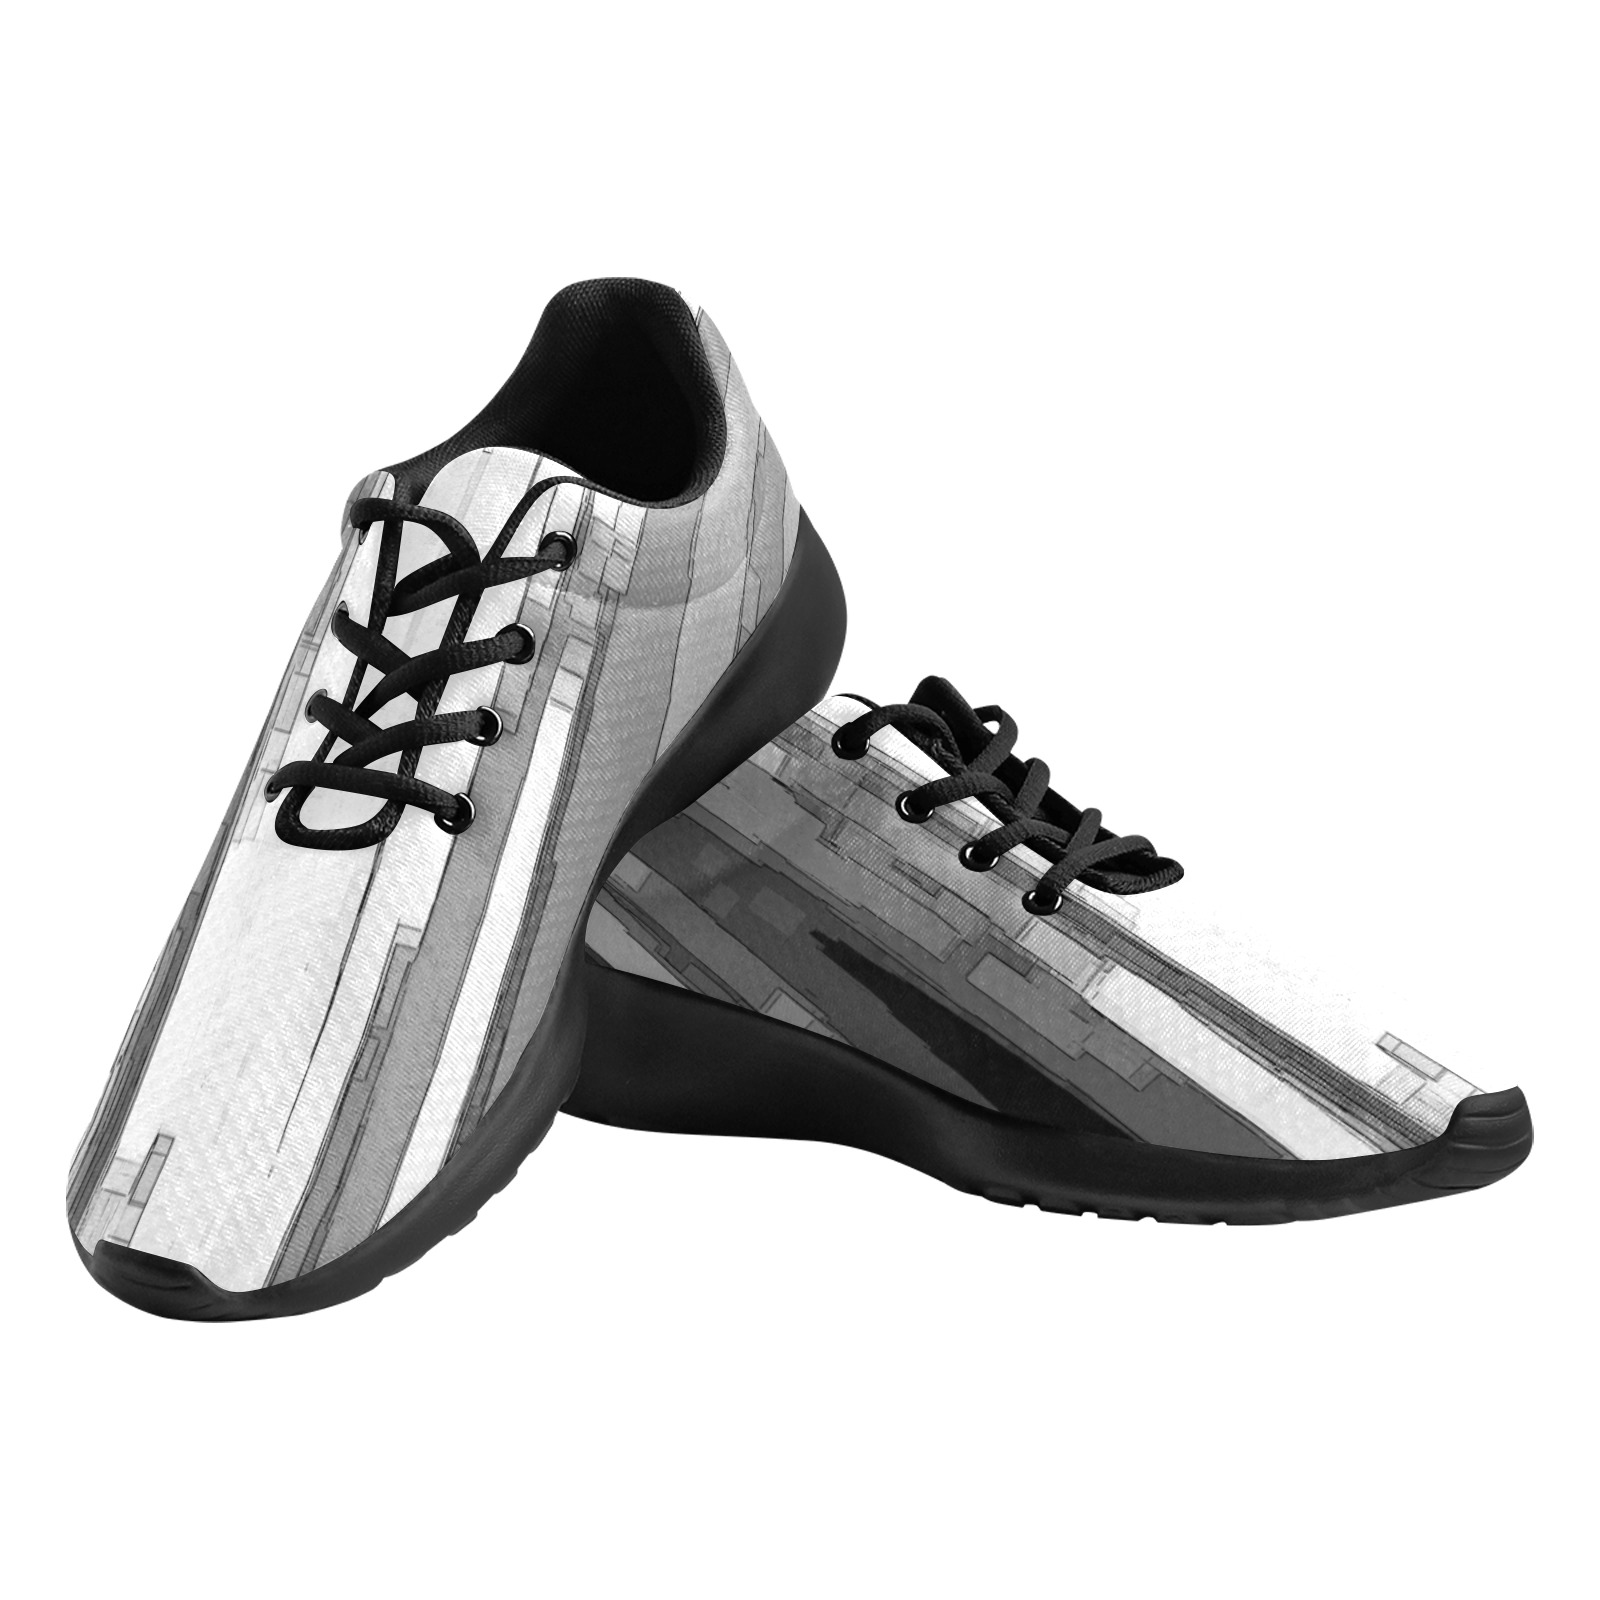 Greyscale Abstract B&W Art Men's Athletic Shoes (Model 0200)